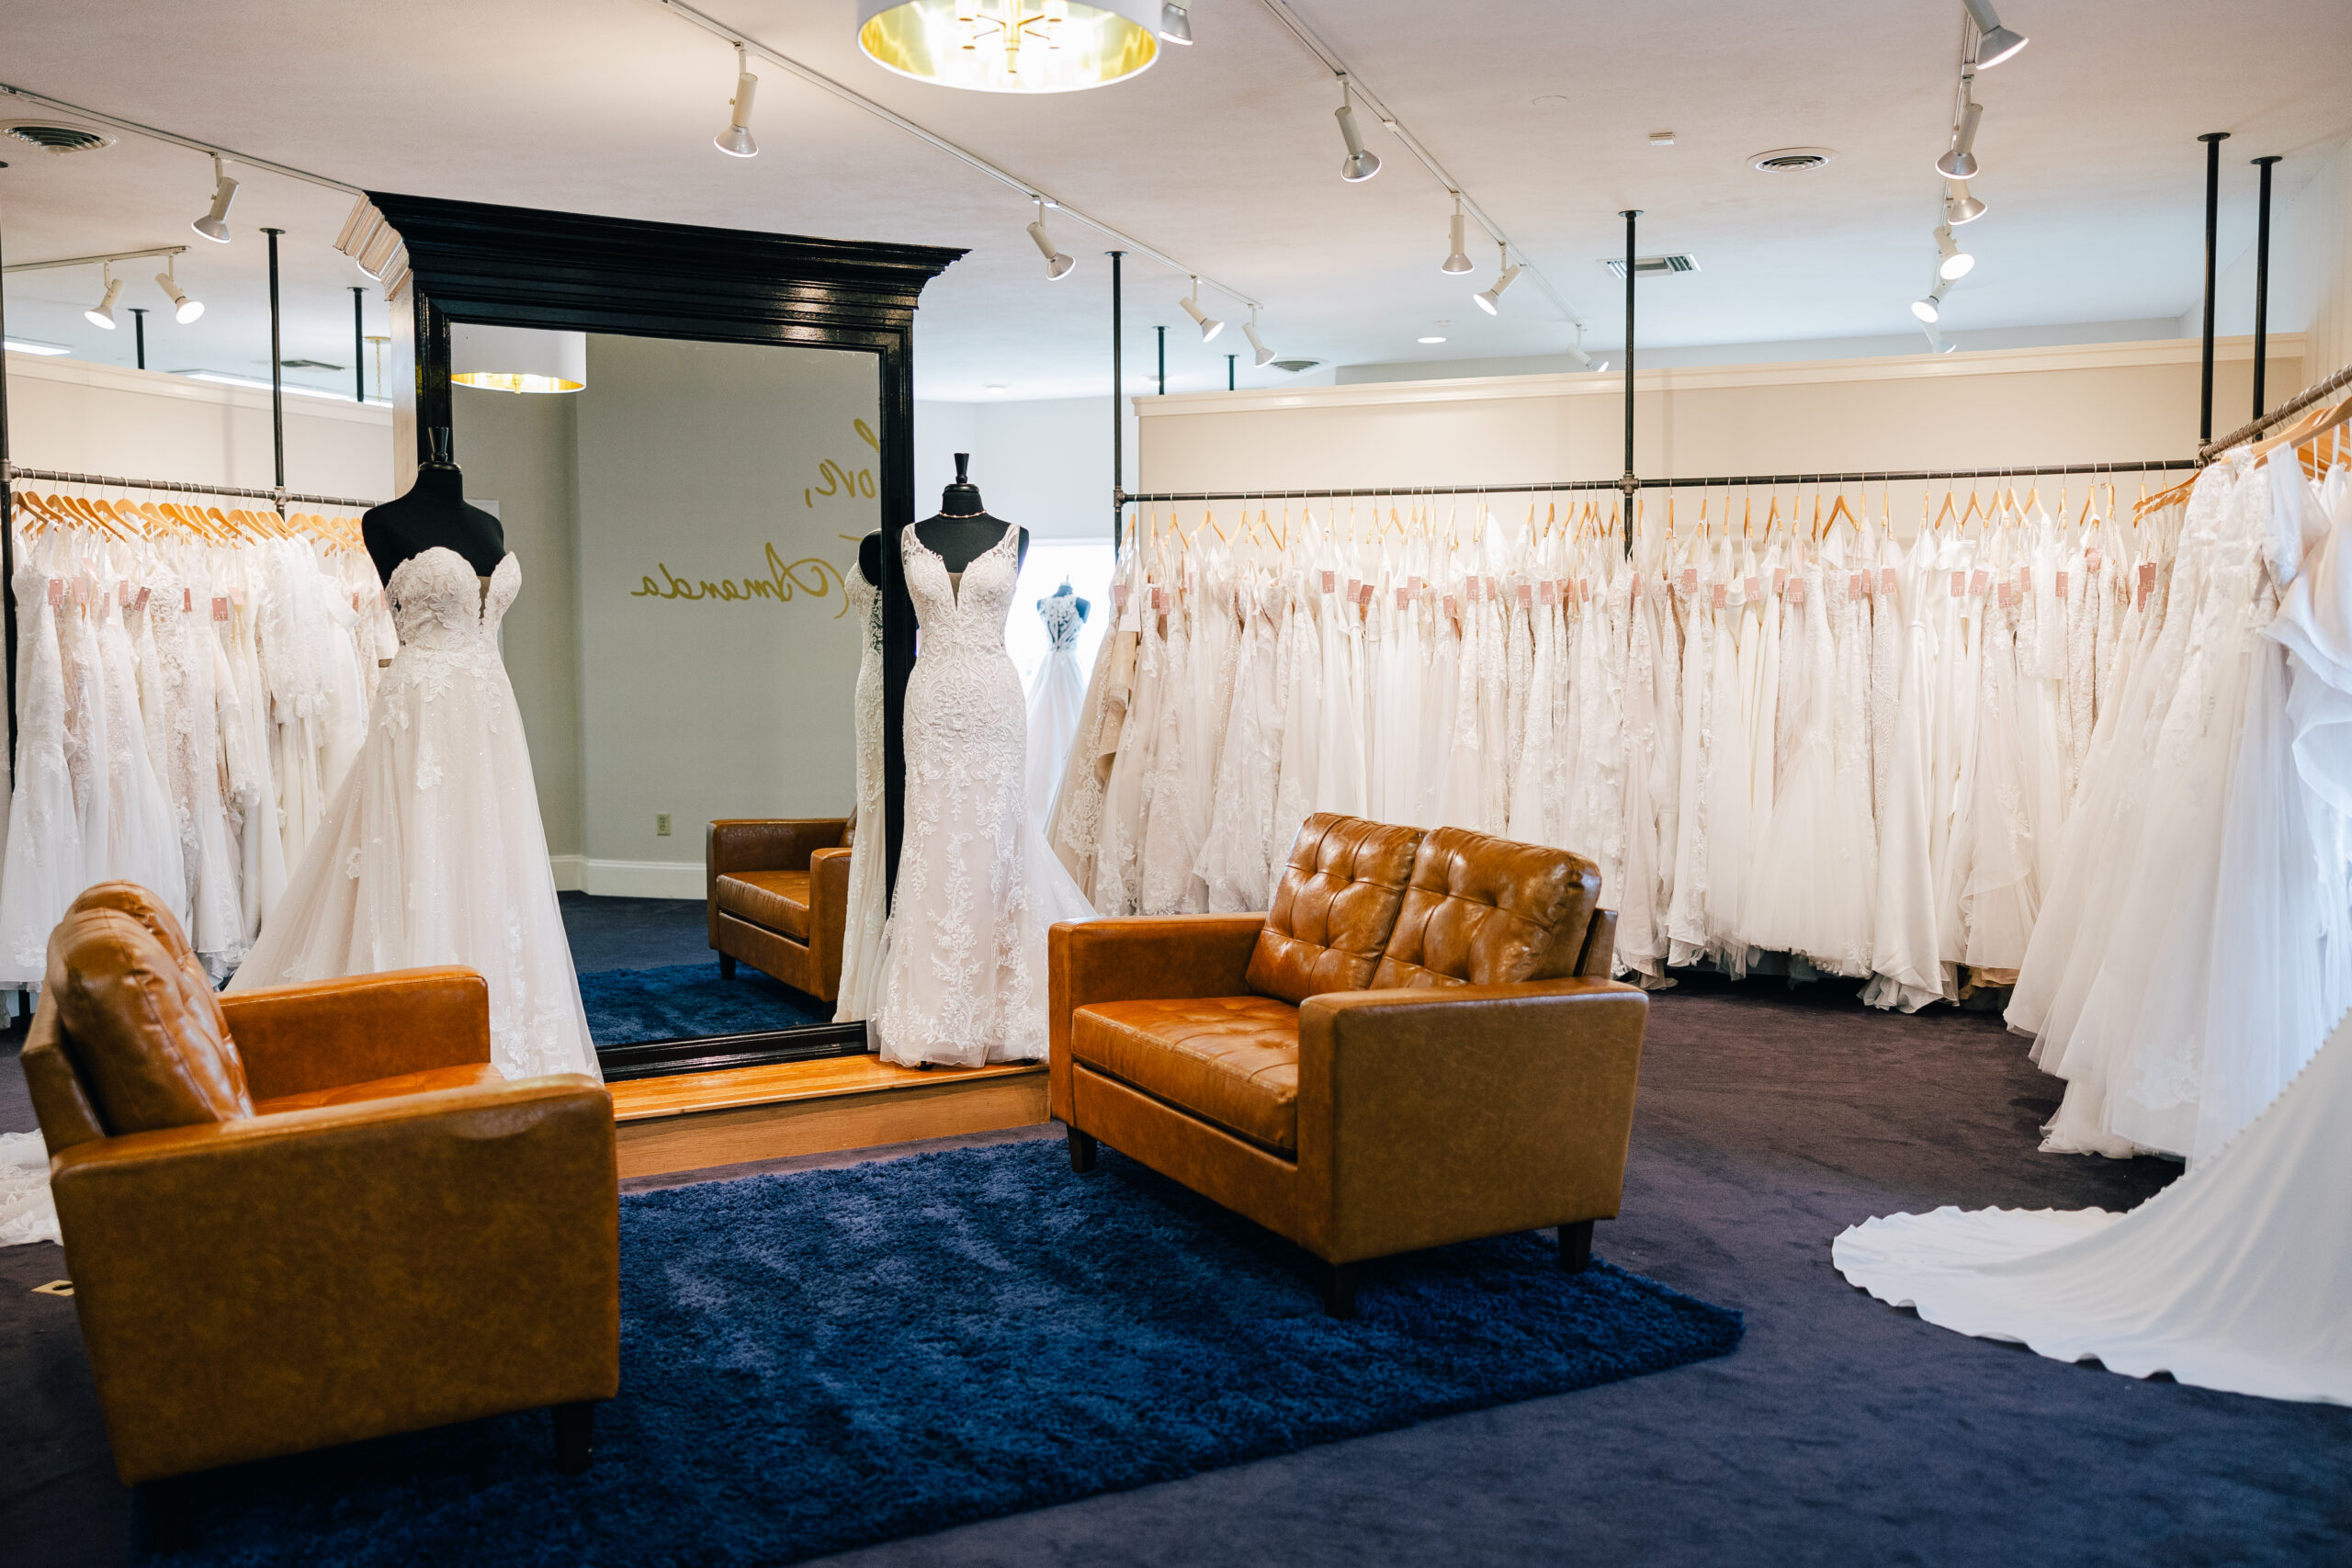 seating area surrounded by racks of bridal gowns